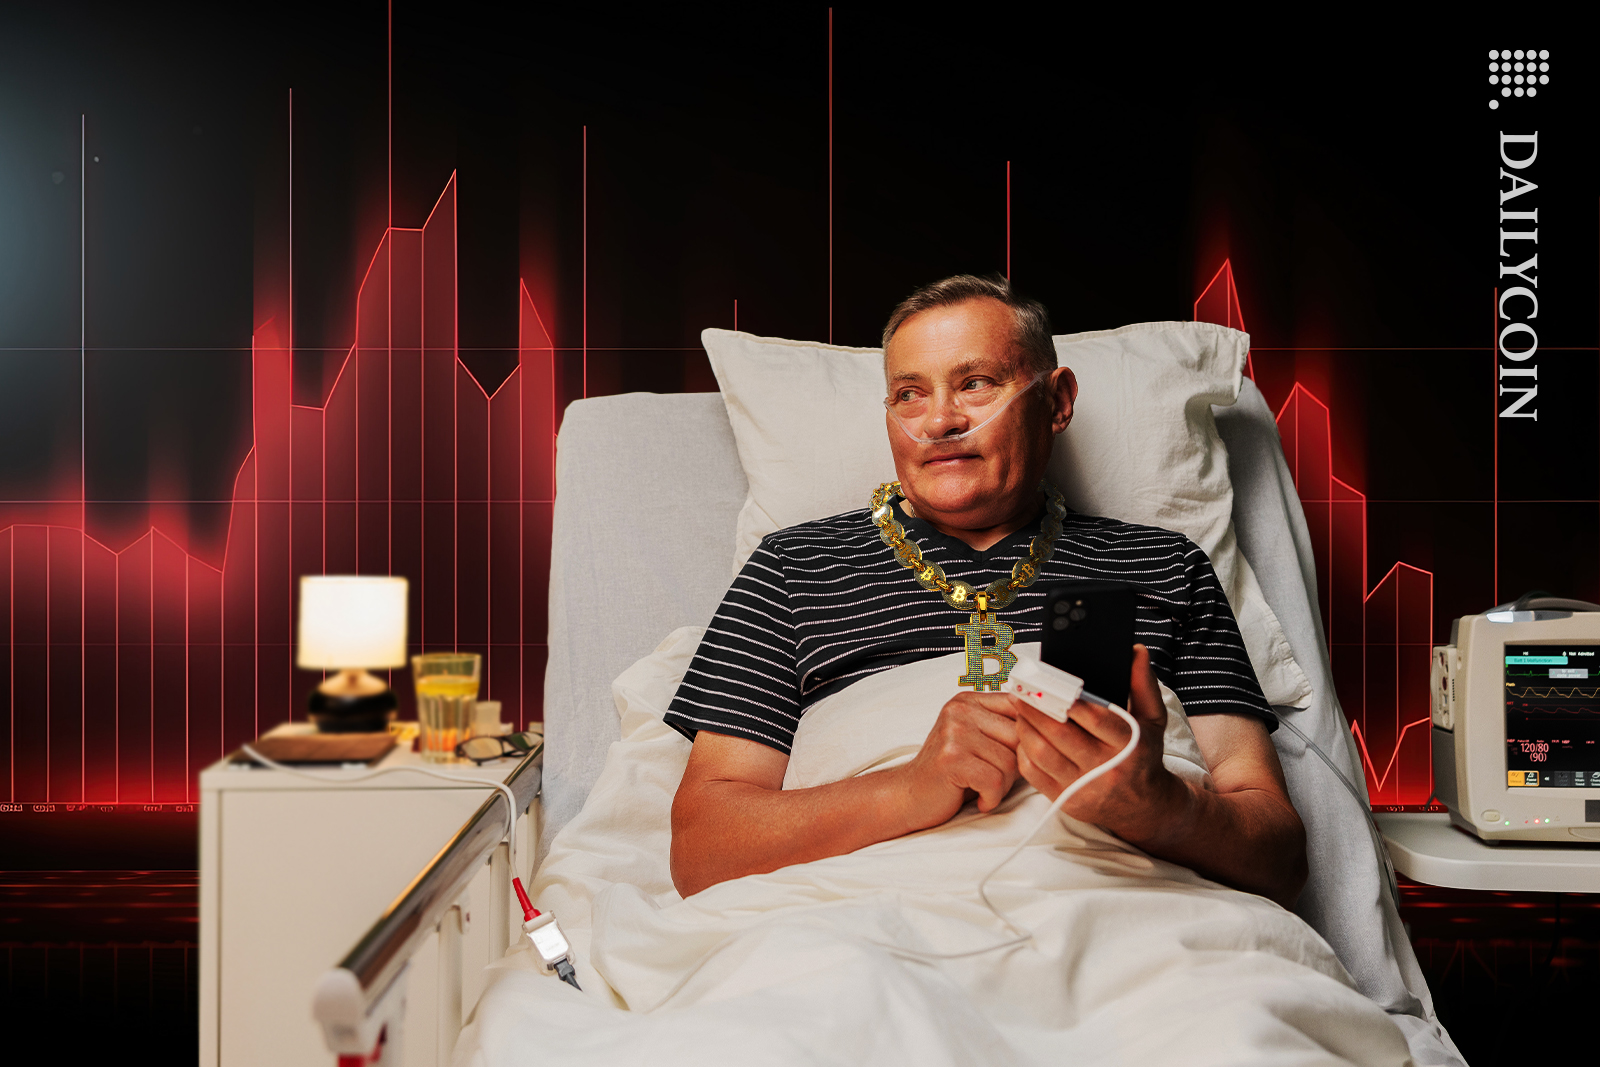 Man in hospital trading bitcoin with a BTC necklace, and a red graph behind him.